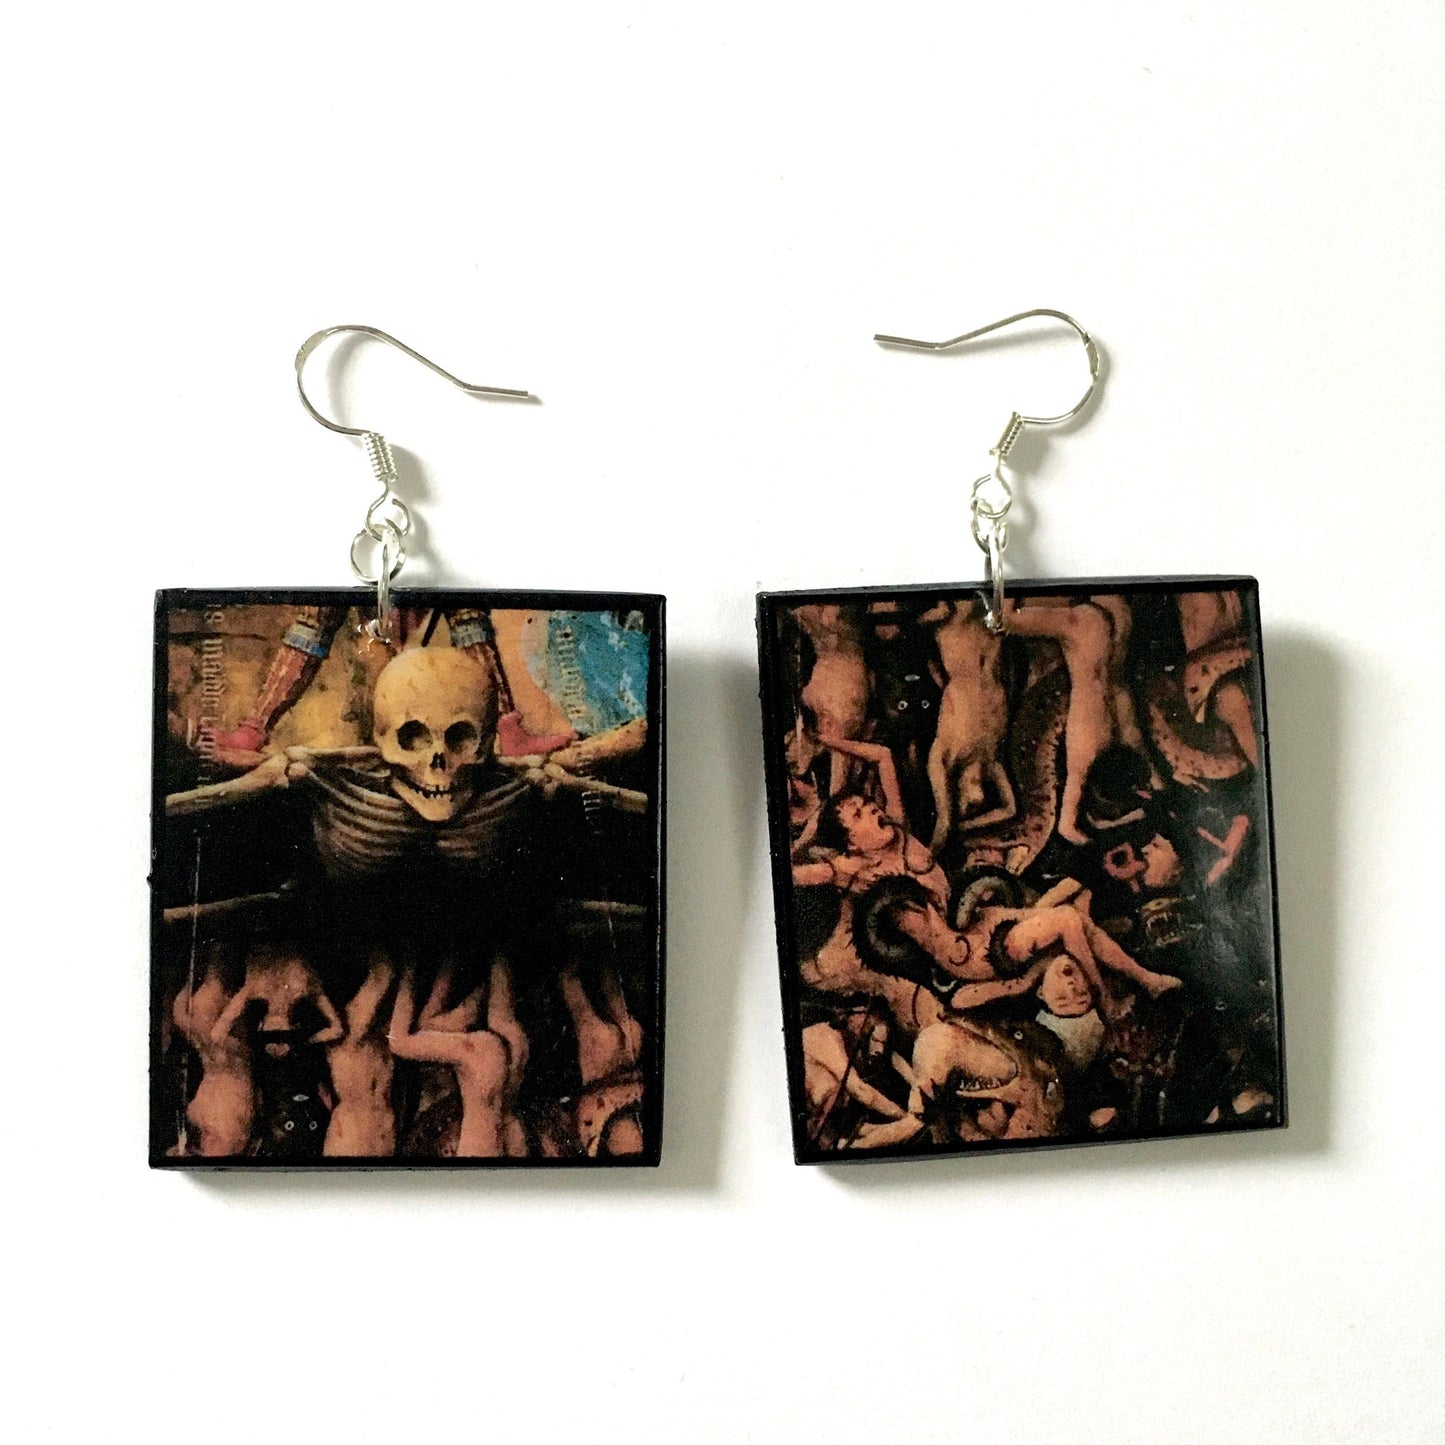 obljewellery statement, artsy gifts. The earrings represent a detail of the gothic painting” The Crucifixion; The Last Judgment” by Jan Van Eyck 